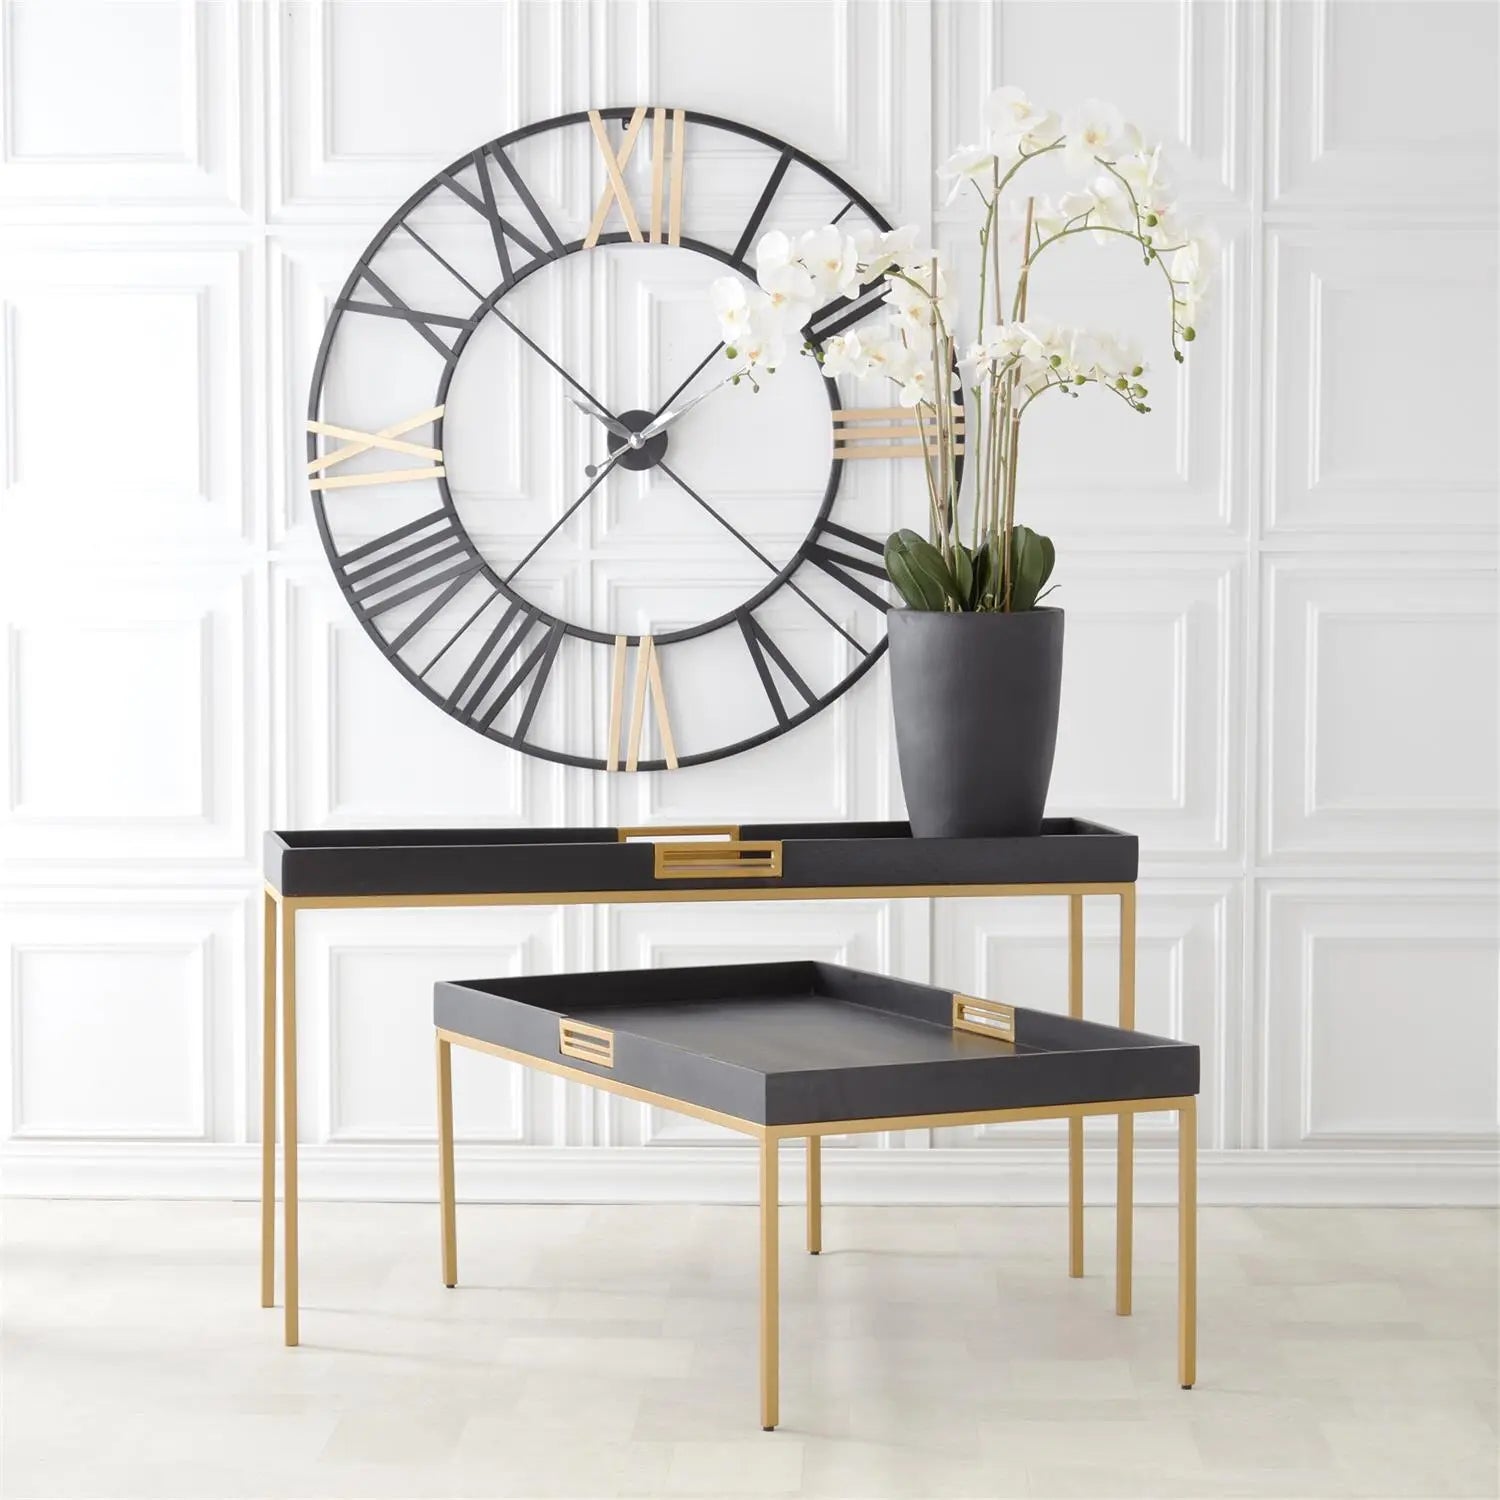 K K Interiors 54 in Raised Edge Black Mango Wood Tray Console with Gold Metal